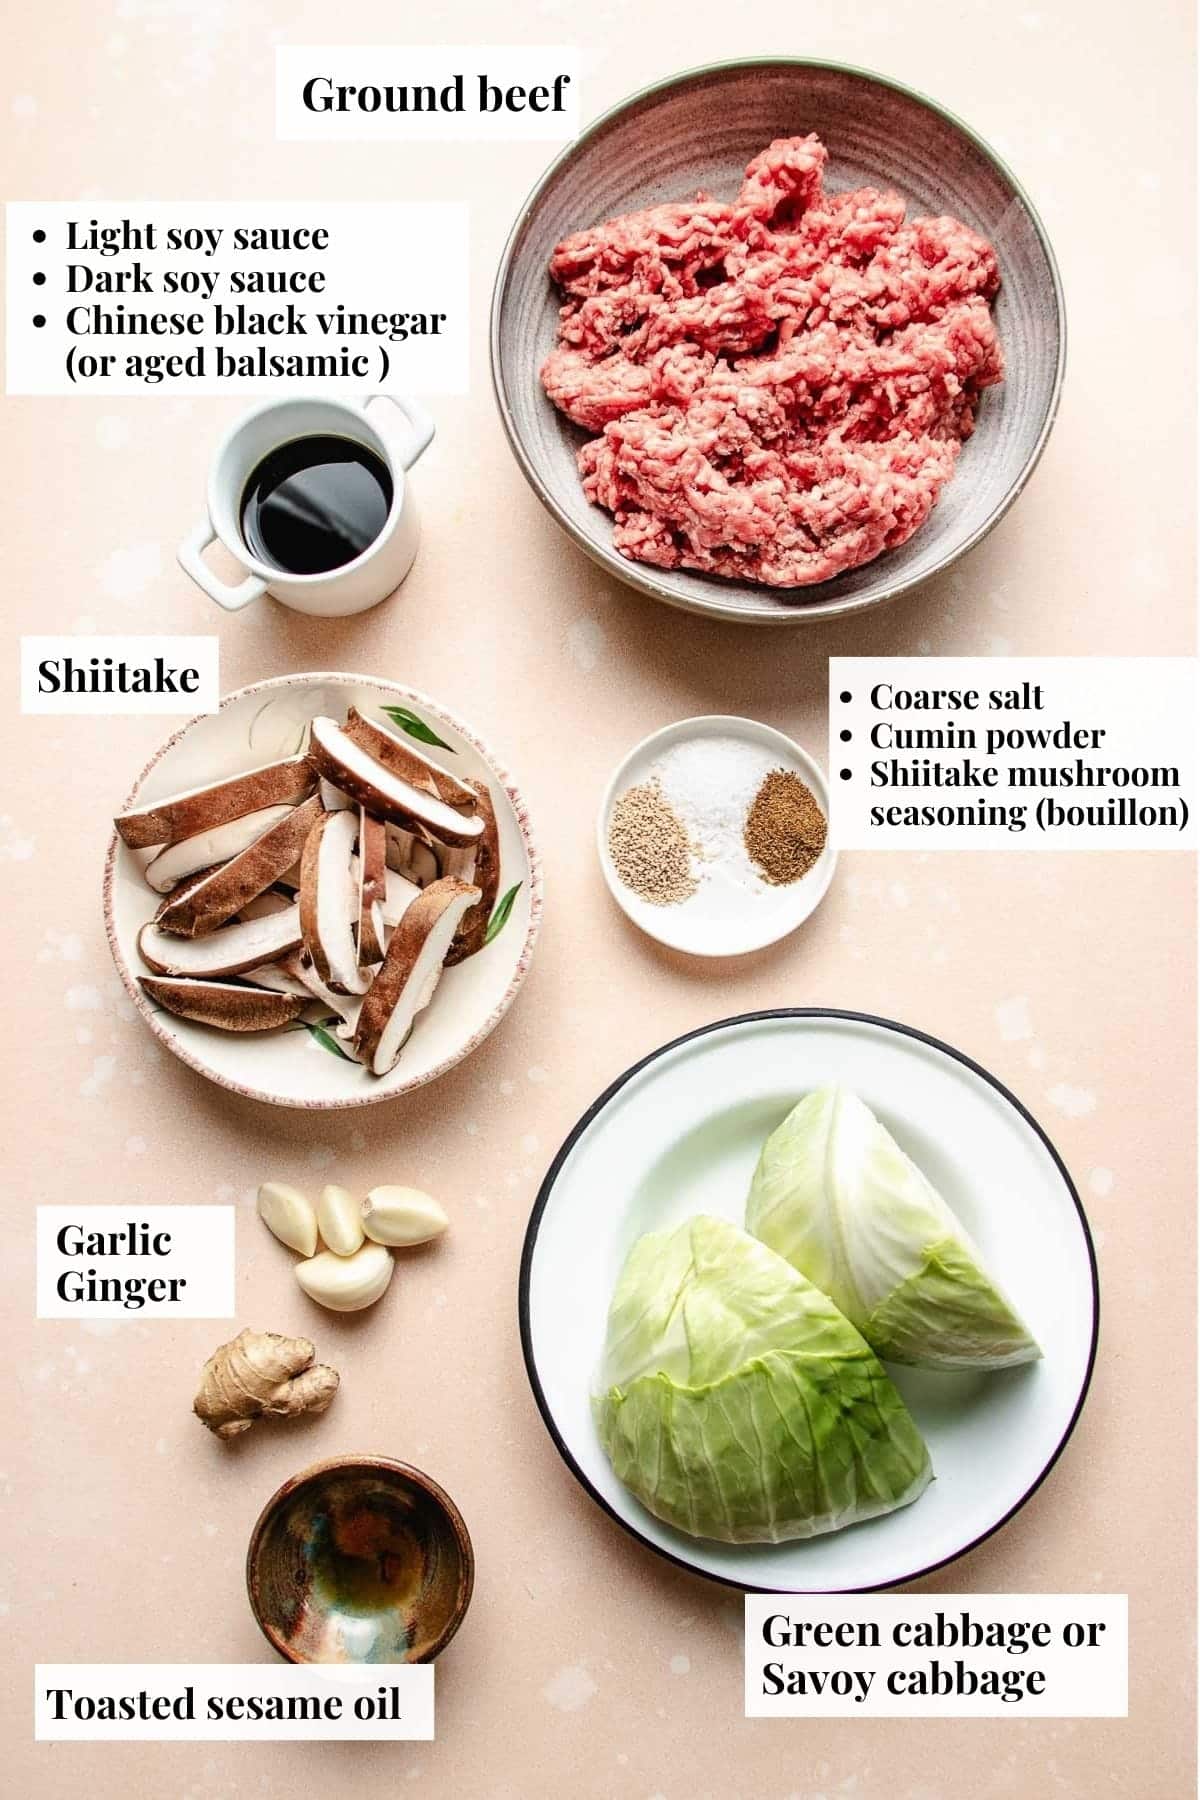 Photo shows ingredients for recipes using cabbage and ground beef.